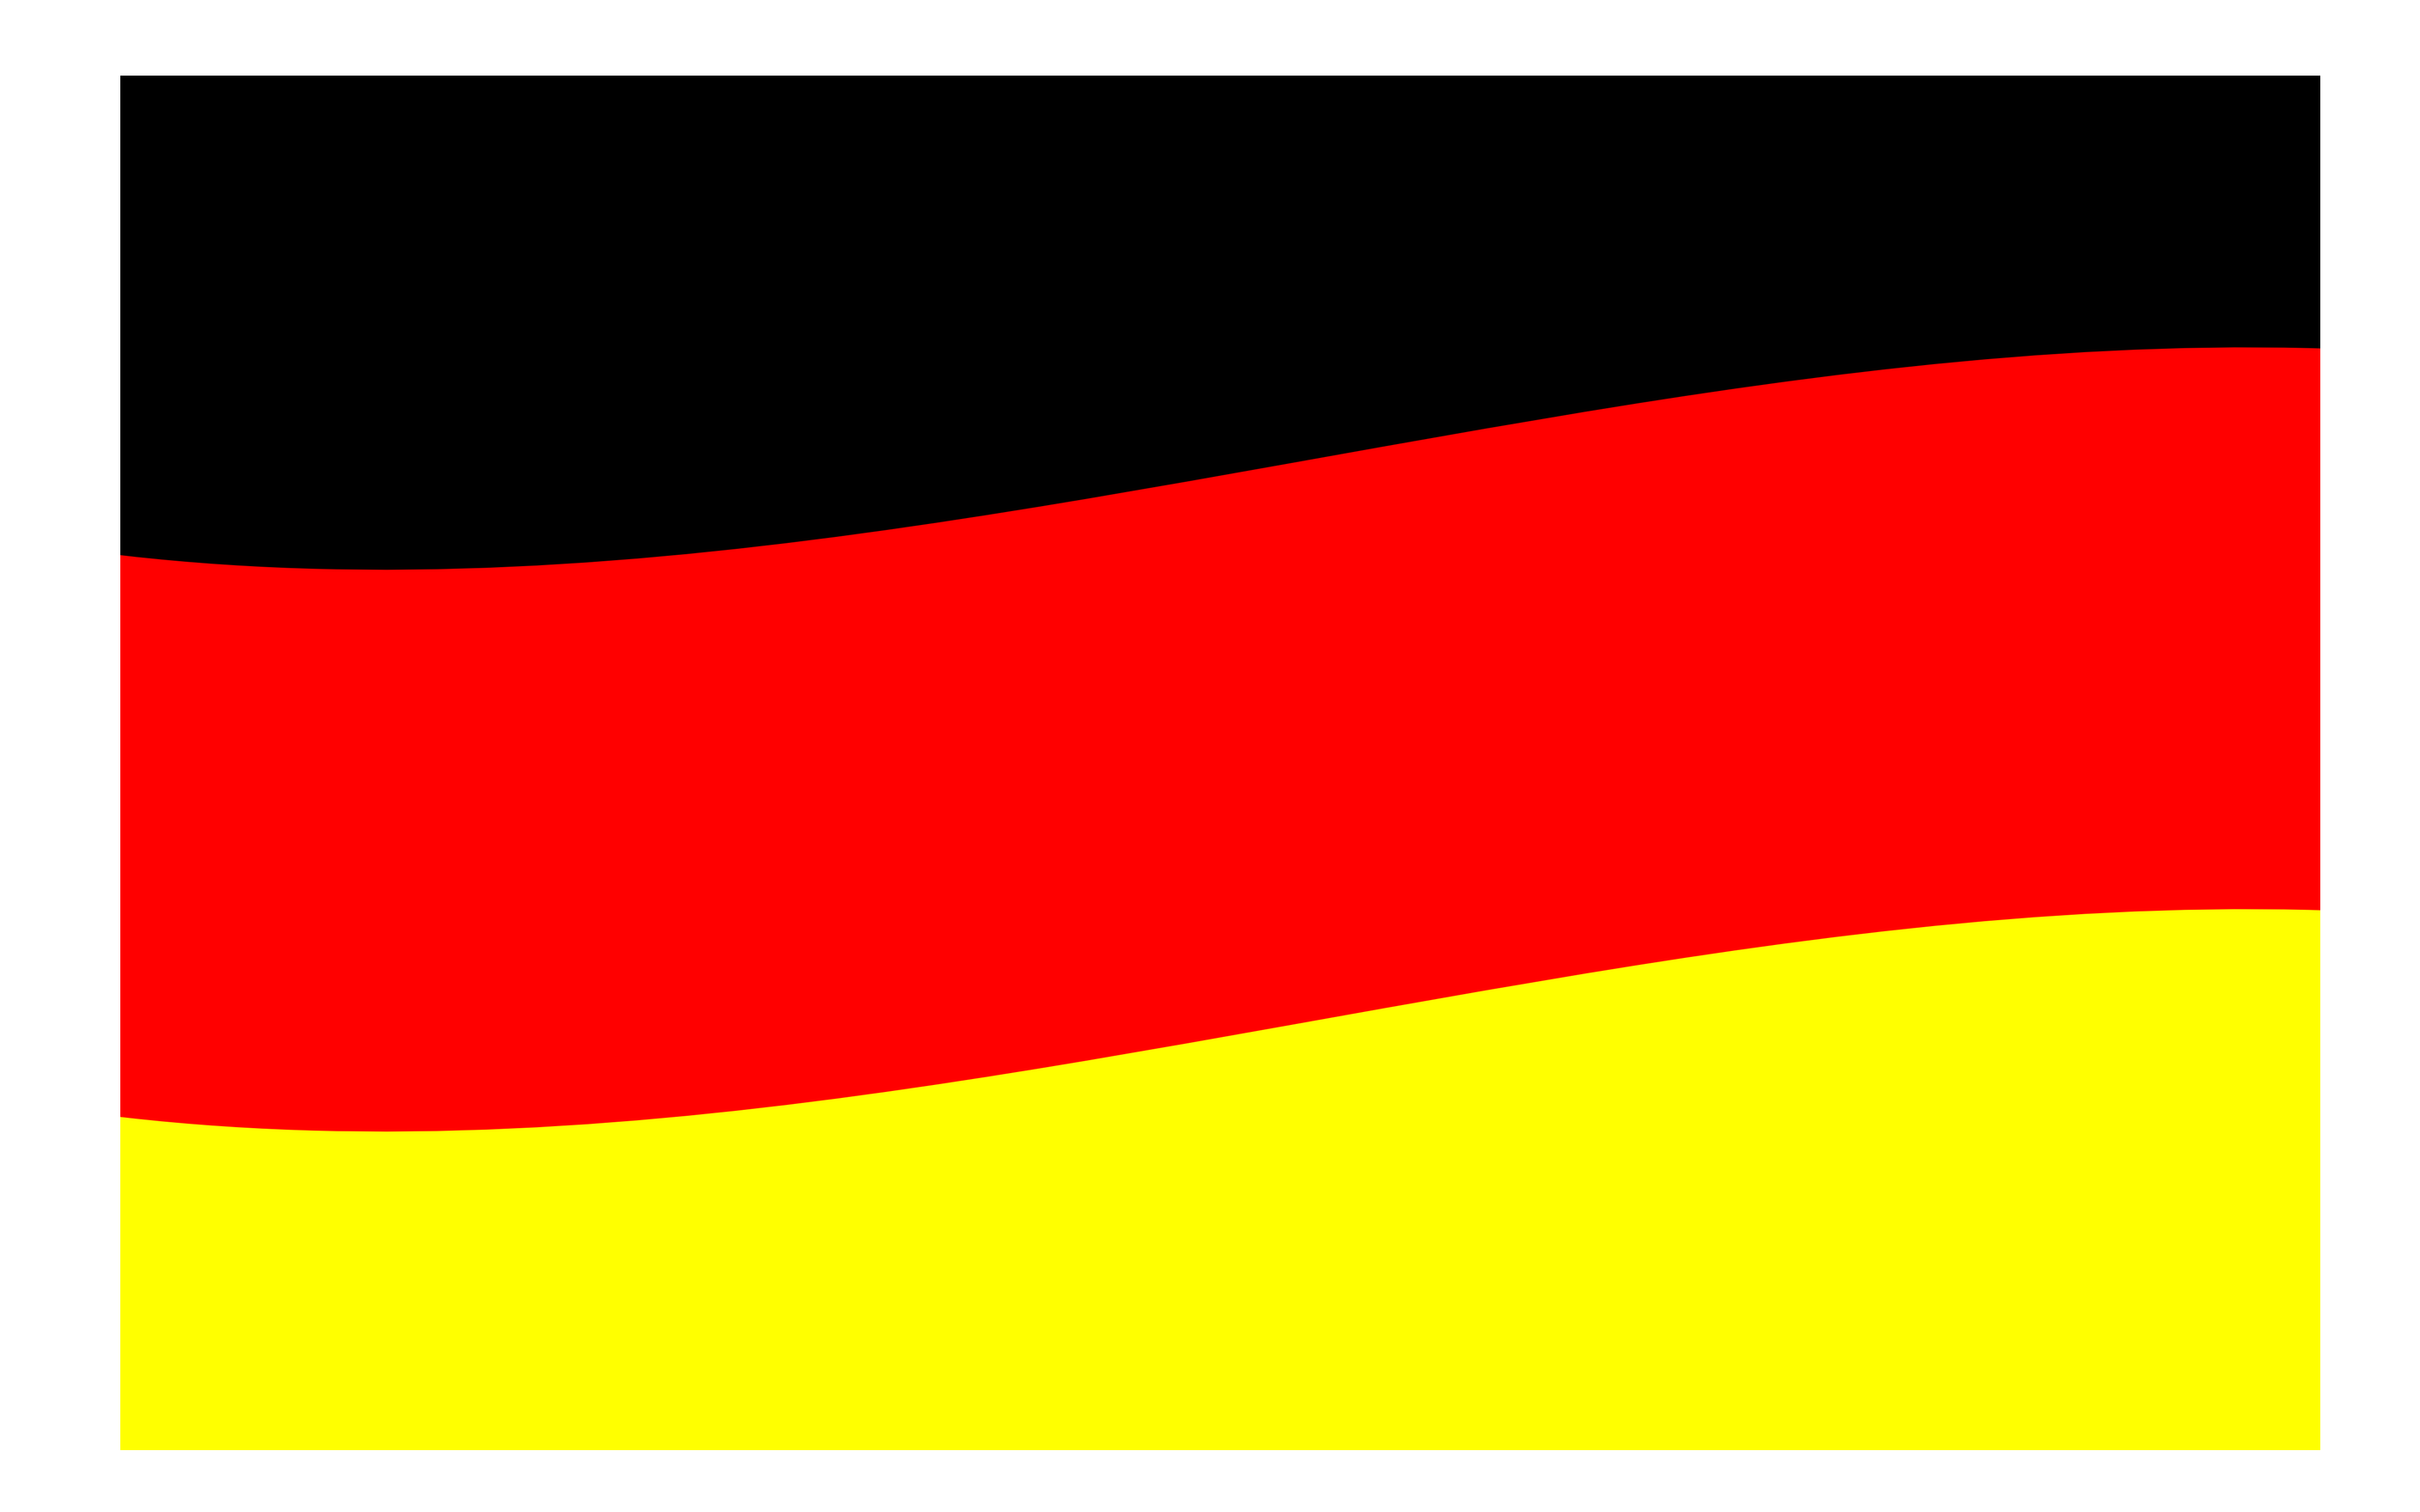 Germany Flag Different Angle PNG Image in Transparent pngteam.com